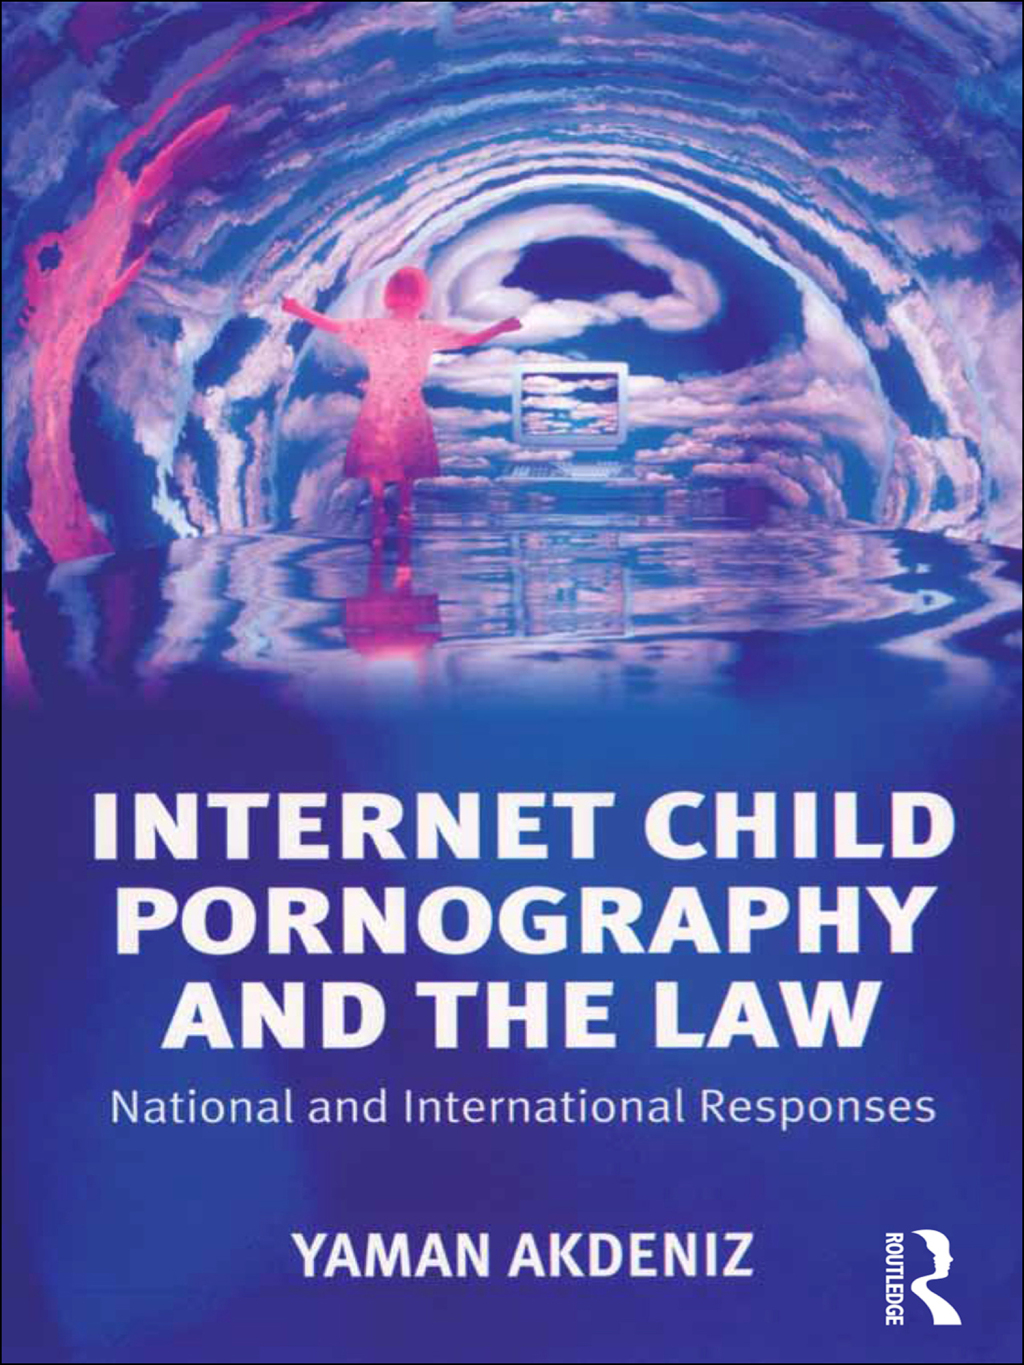 ISBN 9780754622970 product image for Internet Child Pornography and the Law - 1st Edition (eBook Rental) | upcitemdb.com